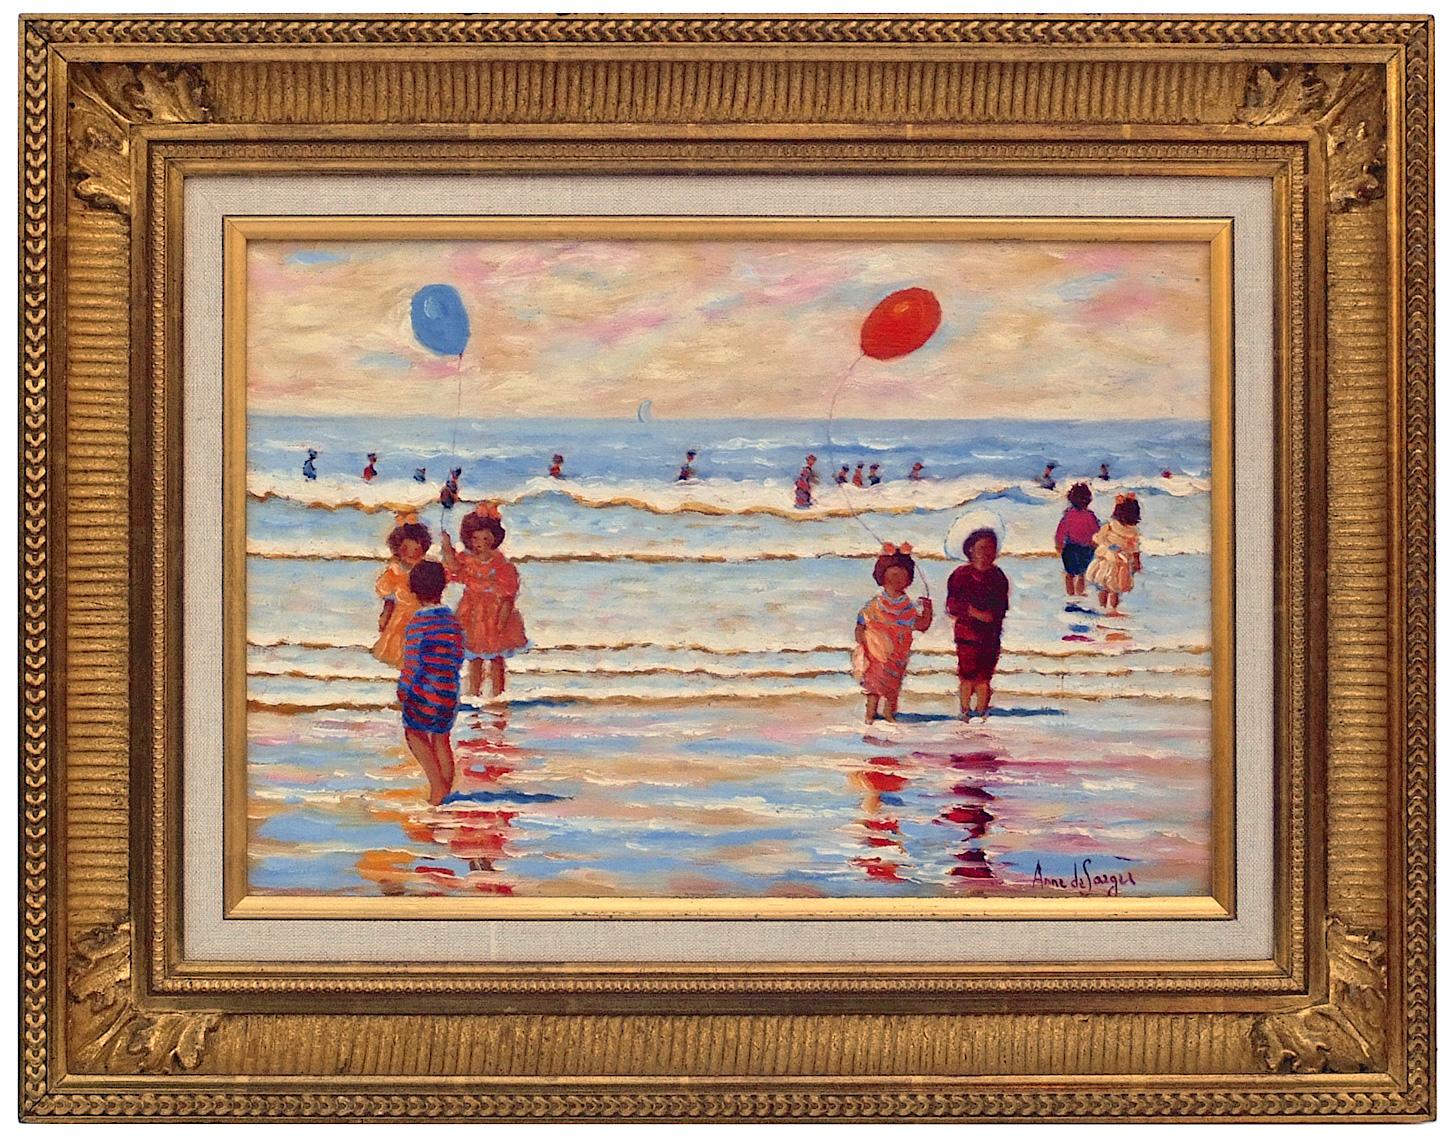 Anne de Saeger Landscape Painting - First Sea Bathing 1900 in French Normandy  